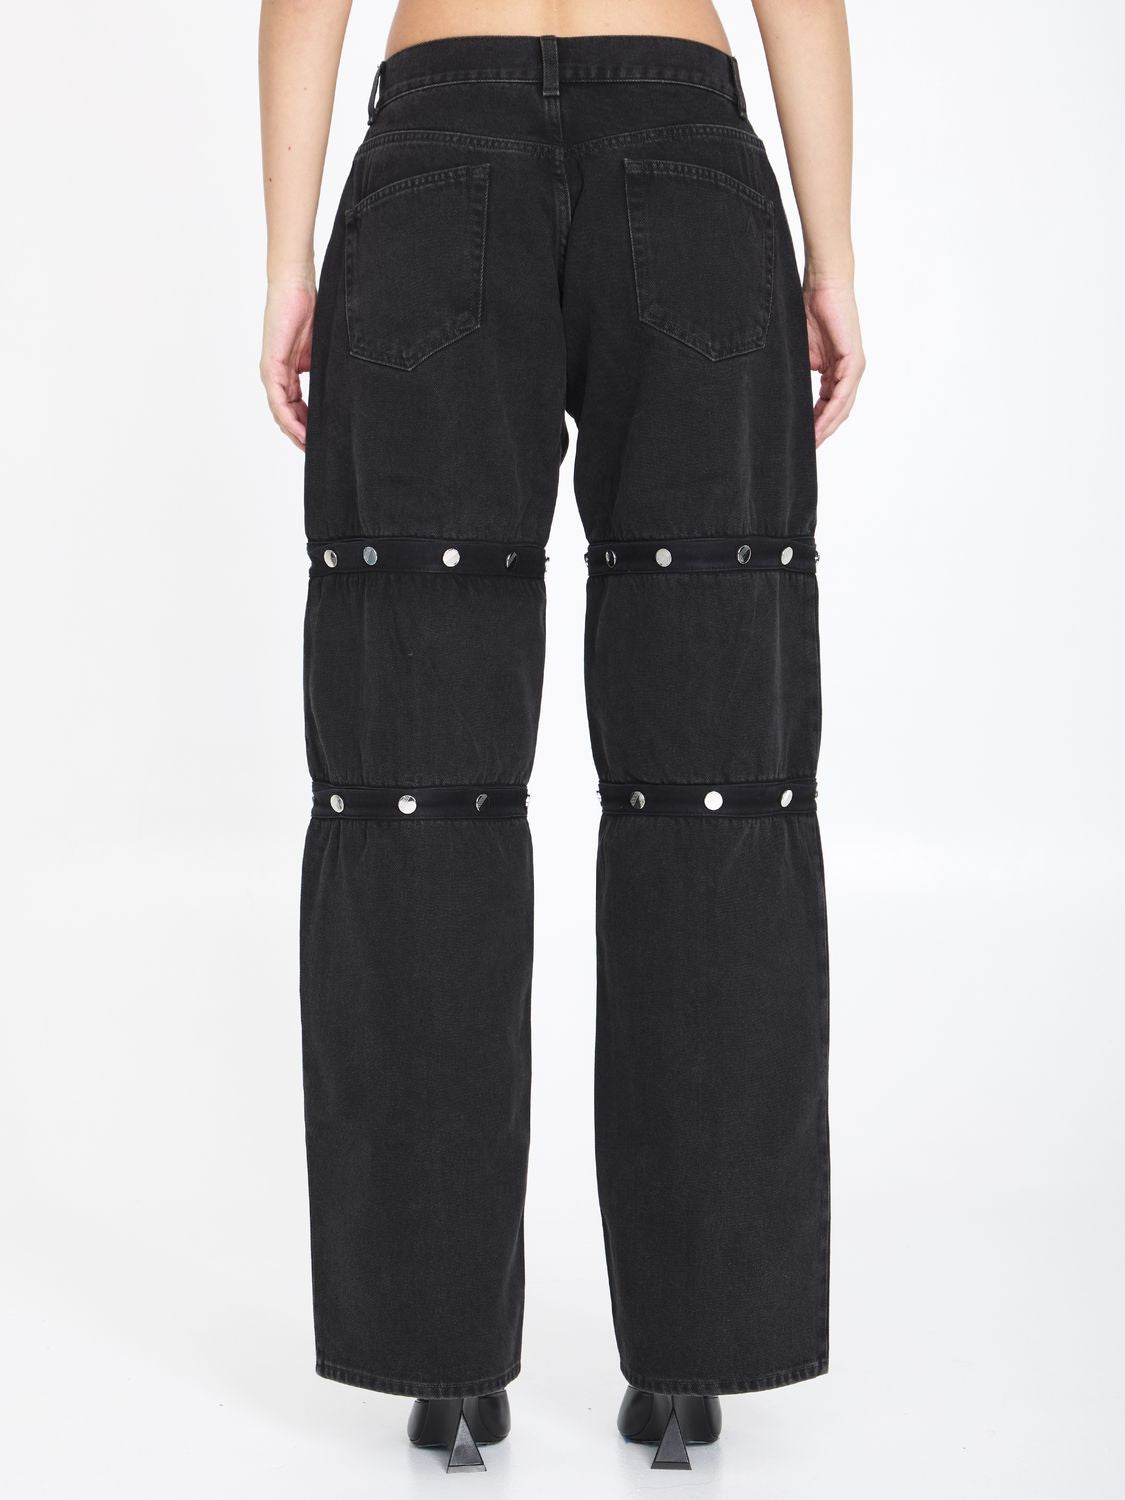 THE ATTICO Black Cotton Denim Pants with Logoed Snap Buttons for Women